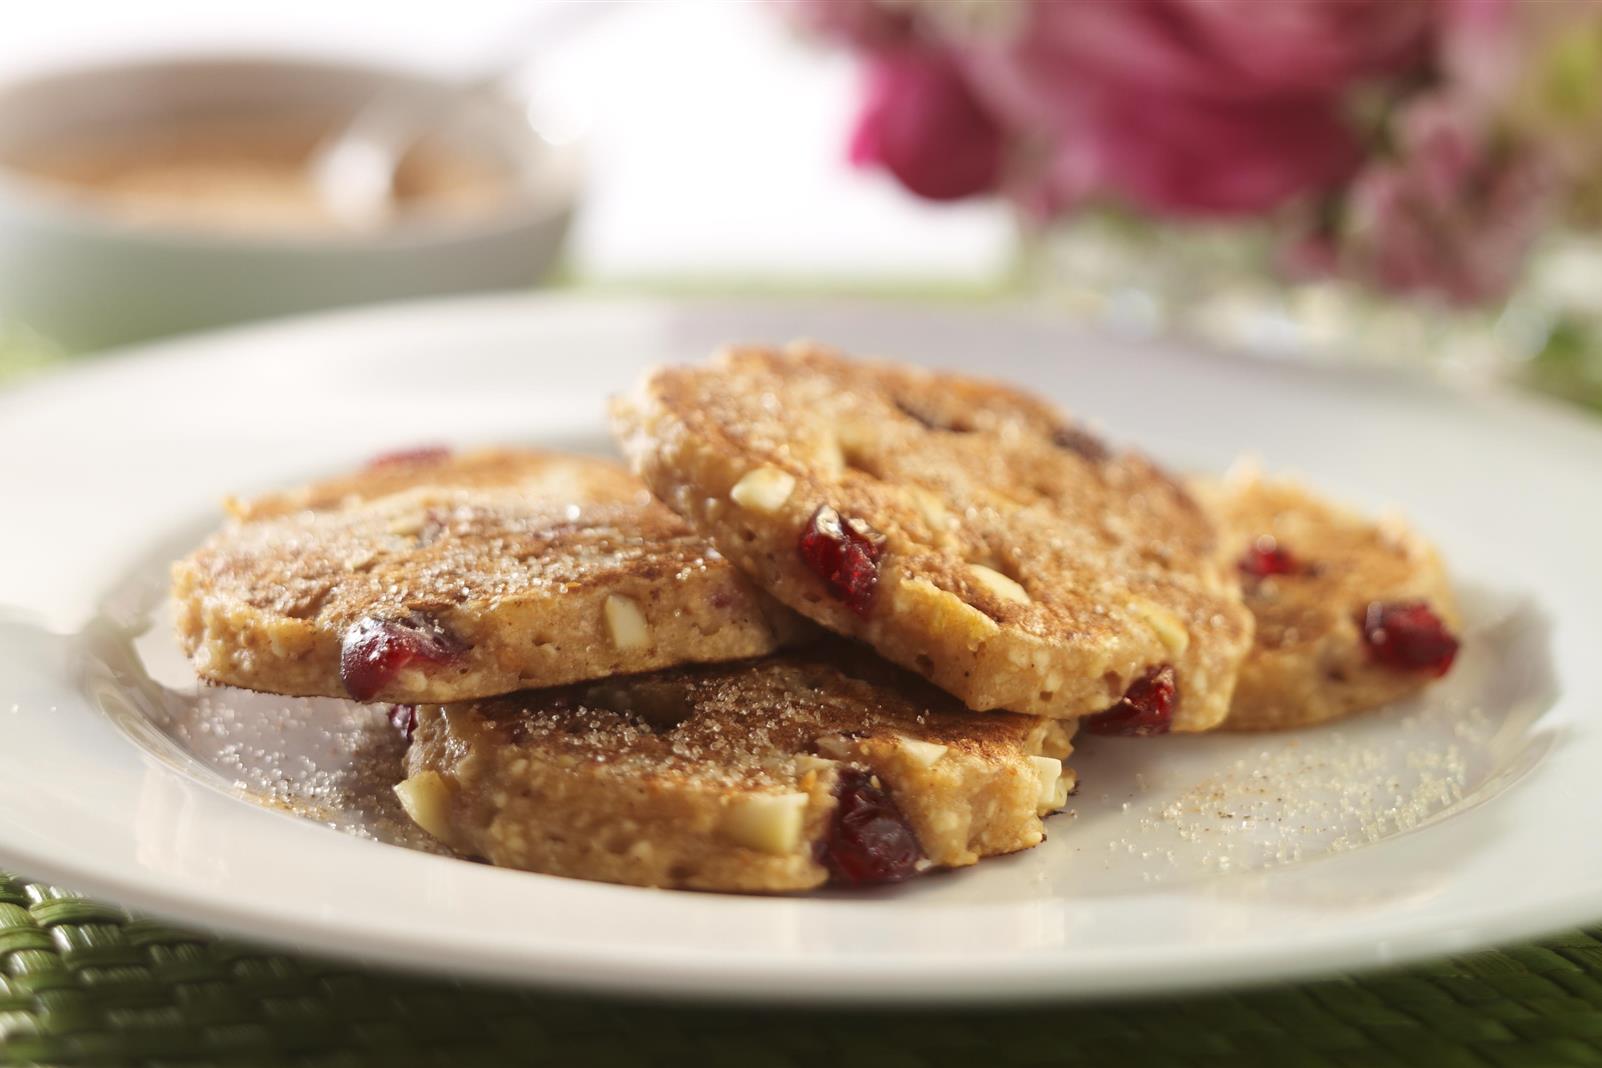 Passover Pancakes with Craisins® Dried Cranberries